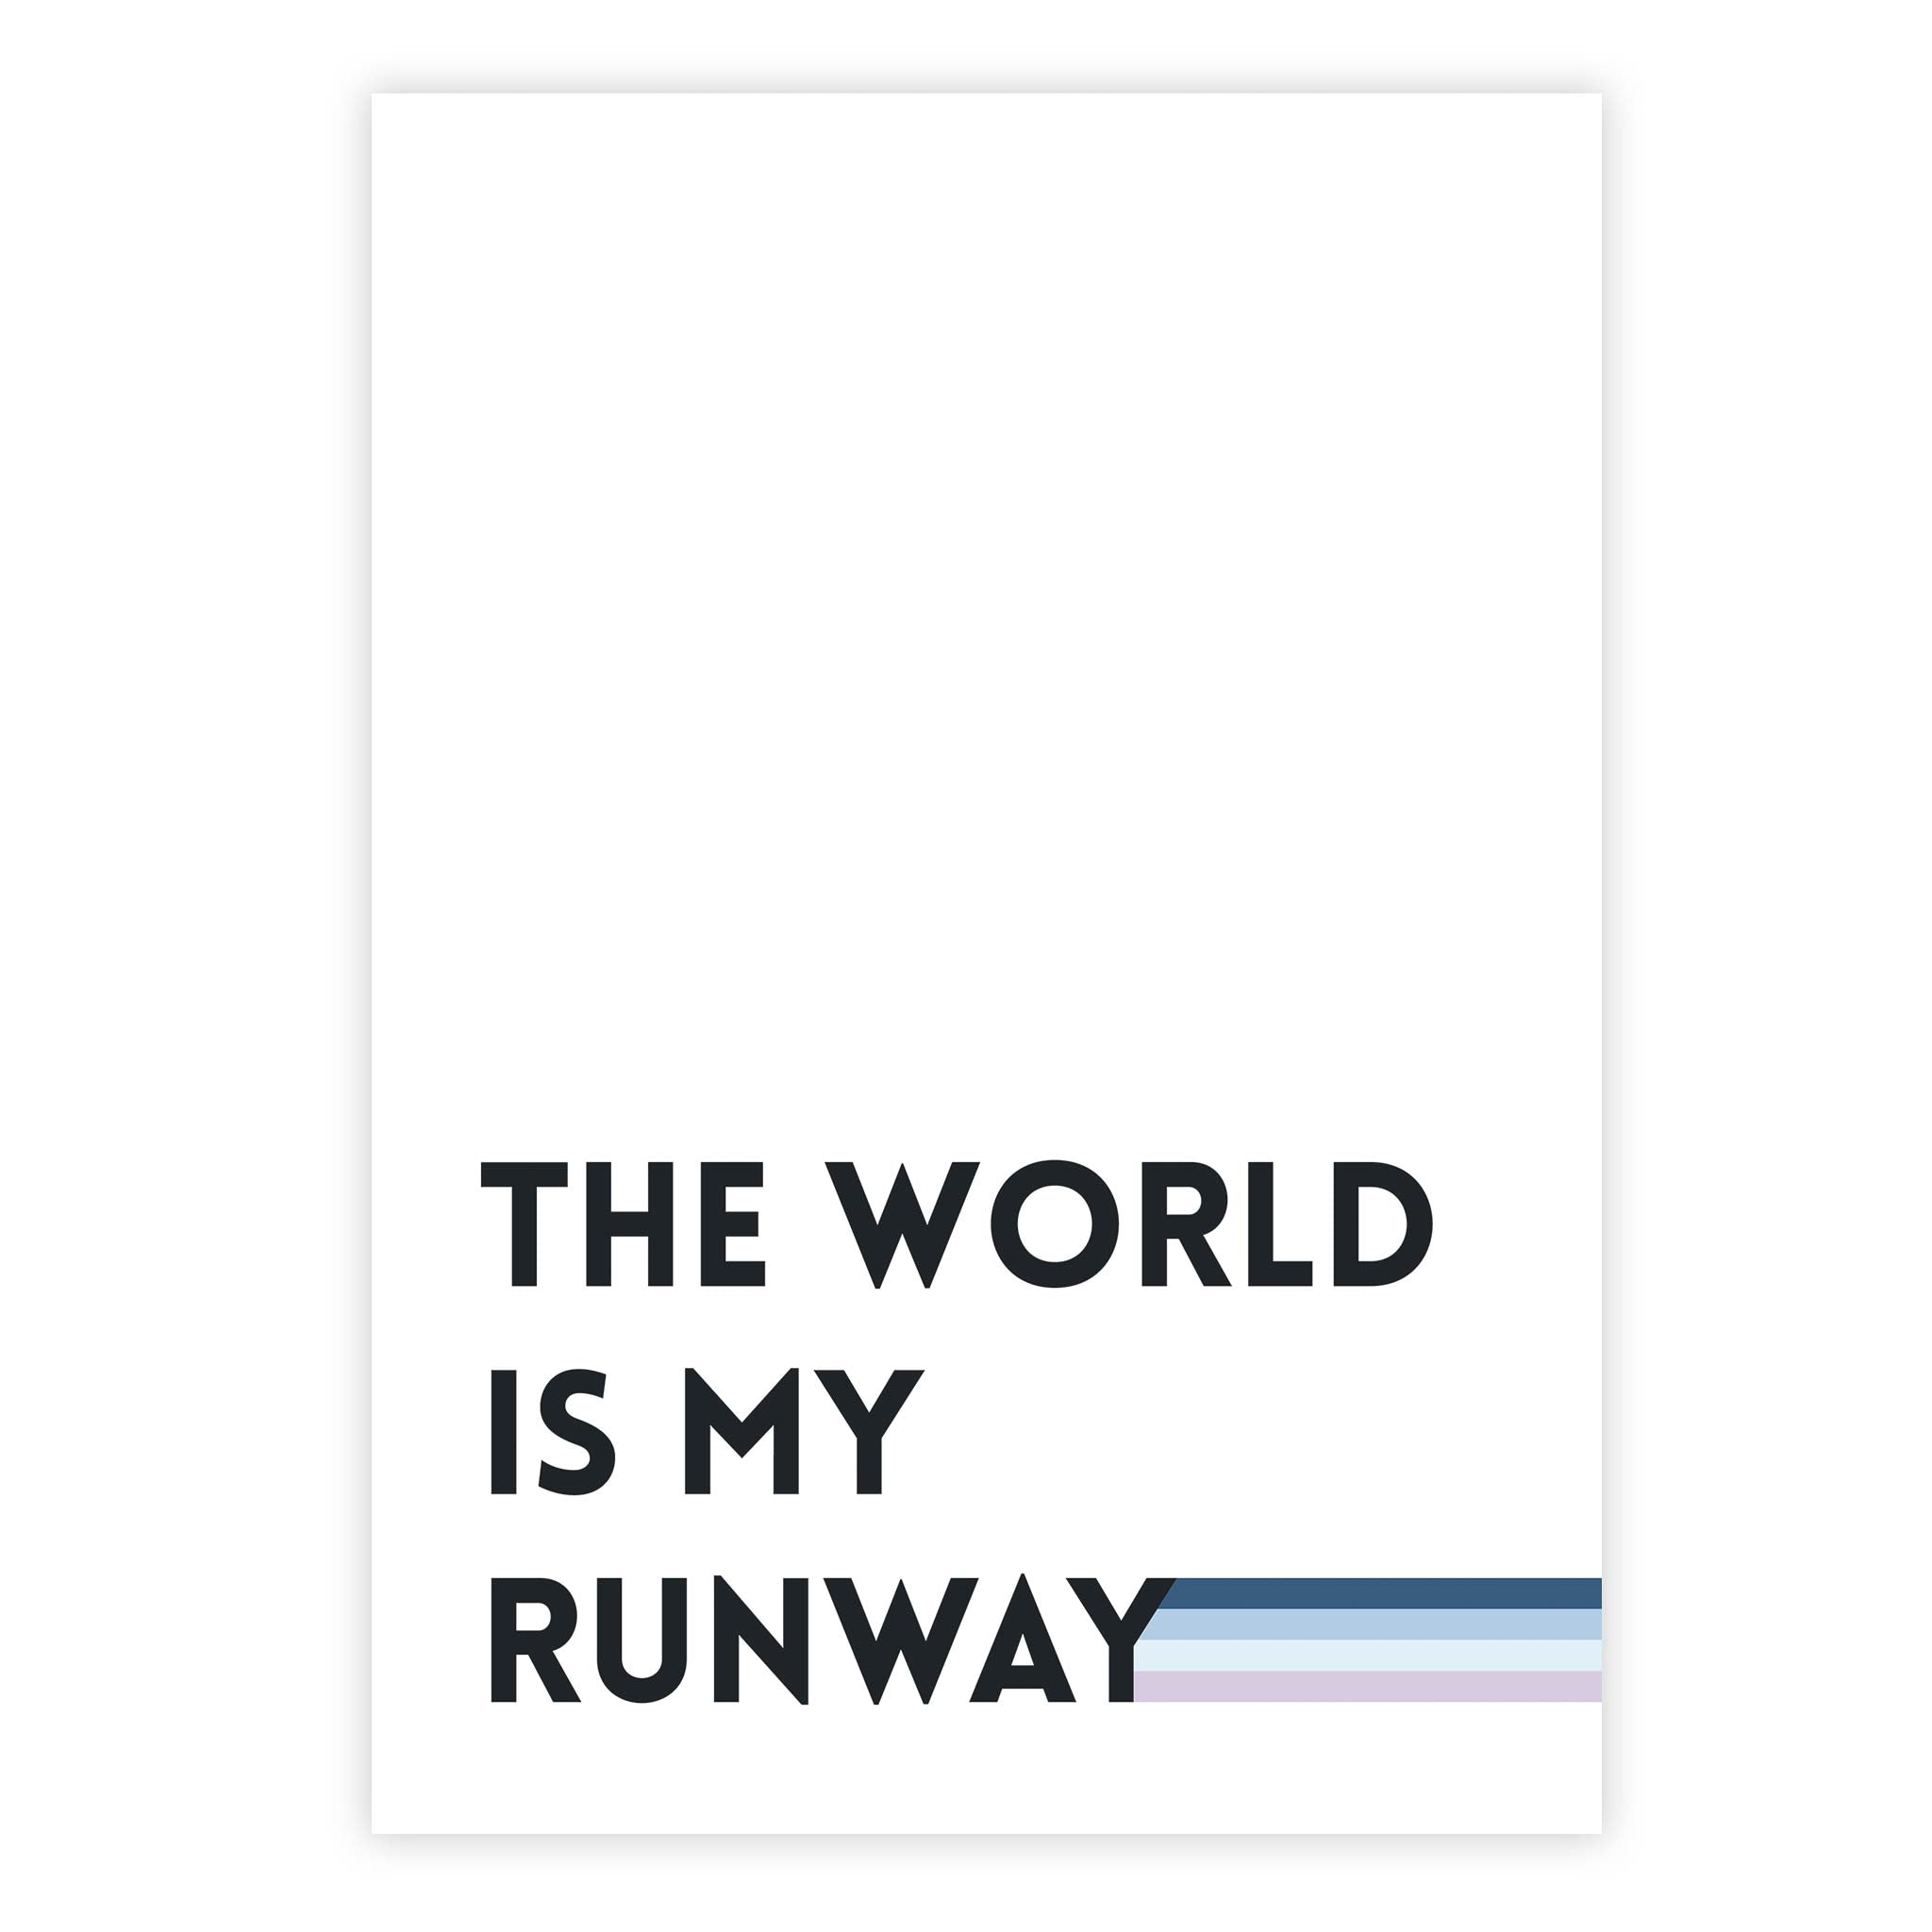 The world is my runway